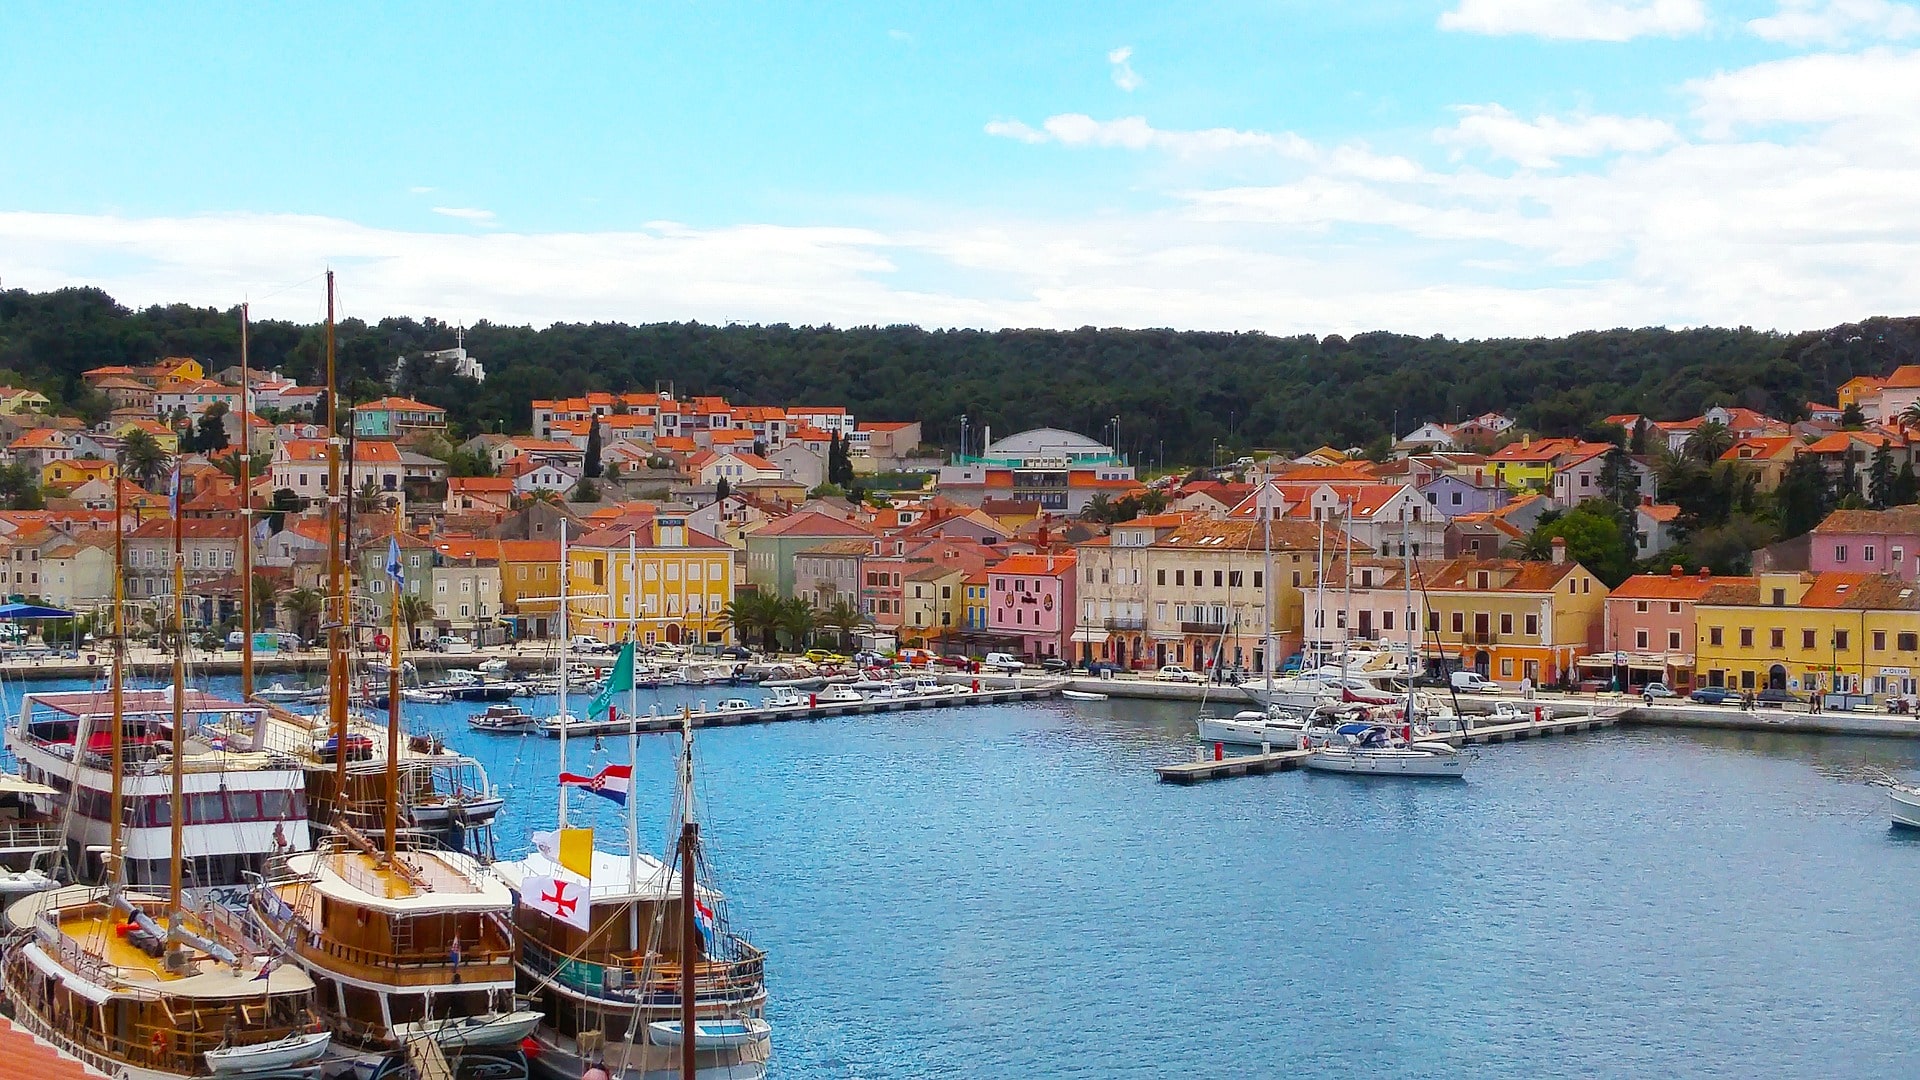 Mali Lošinj is one of the best places to visit in Croatia